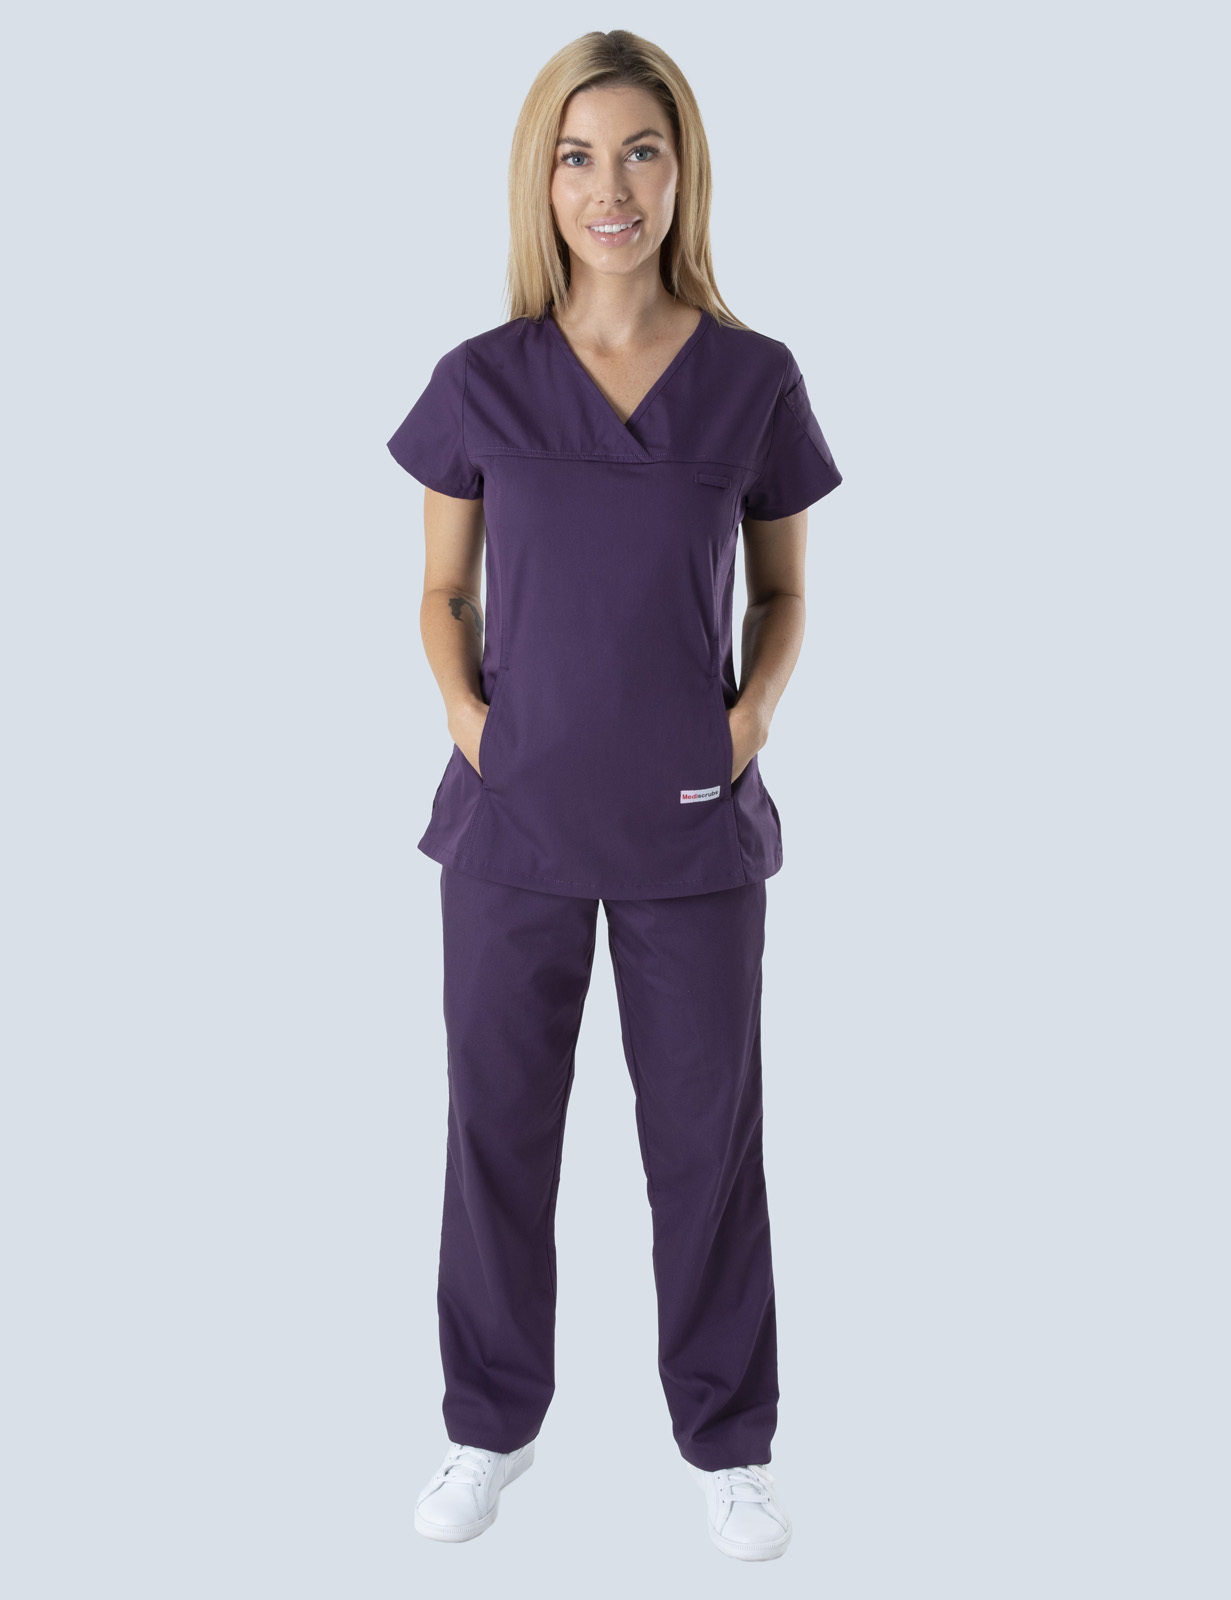 Caboolture Hospital - ED RN (Women's Fit Solid Scrub Top and Cargo Pants in Aubergine incl Logos)